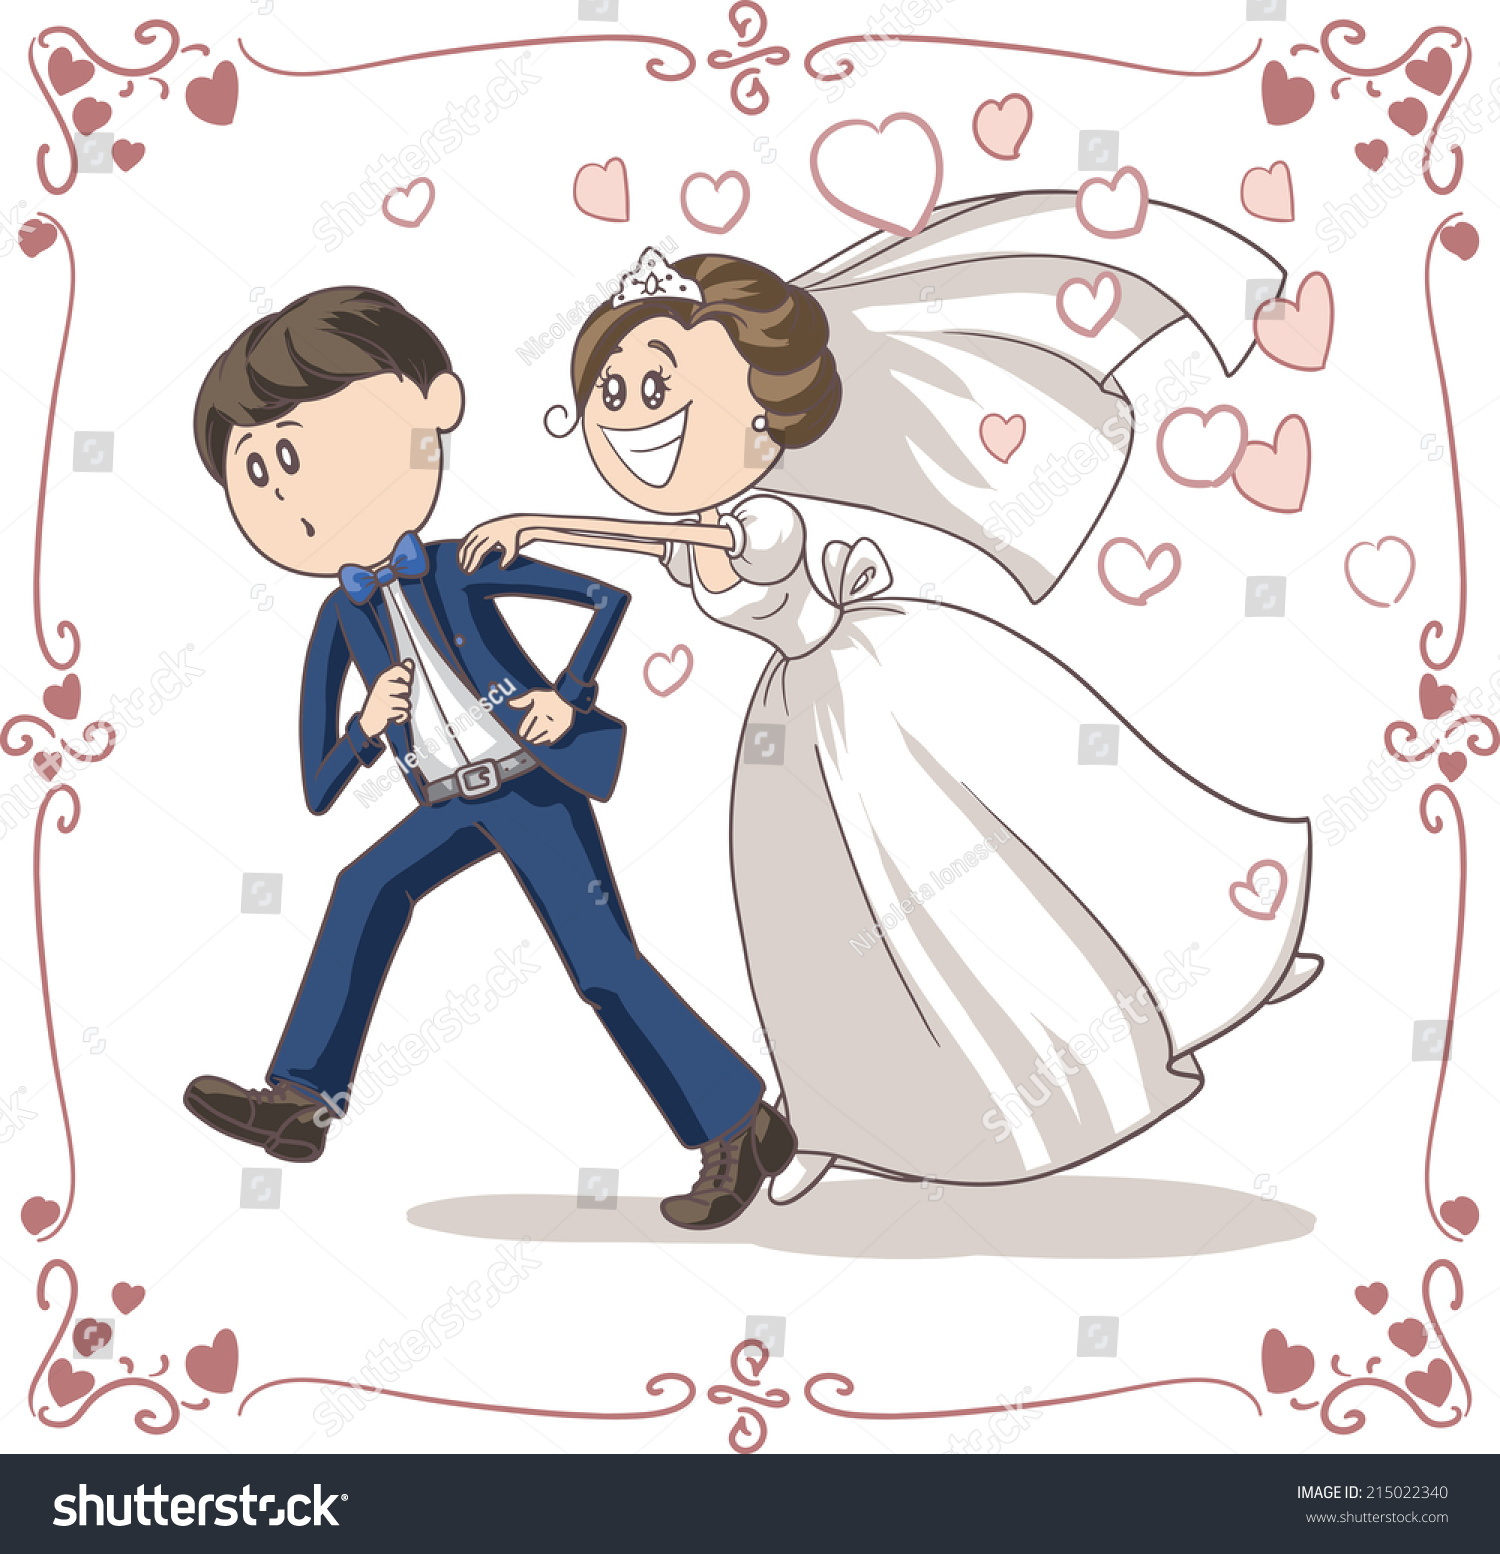 funny wedding clipart bride and groom - photo #20